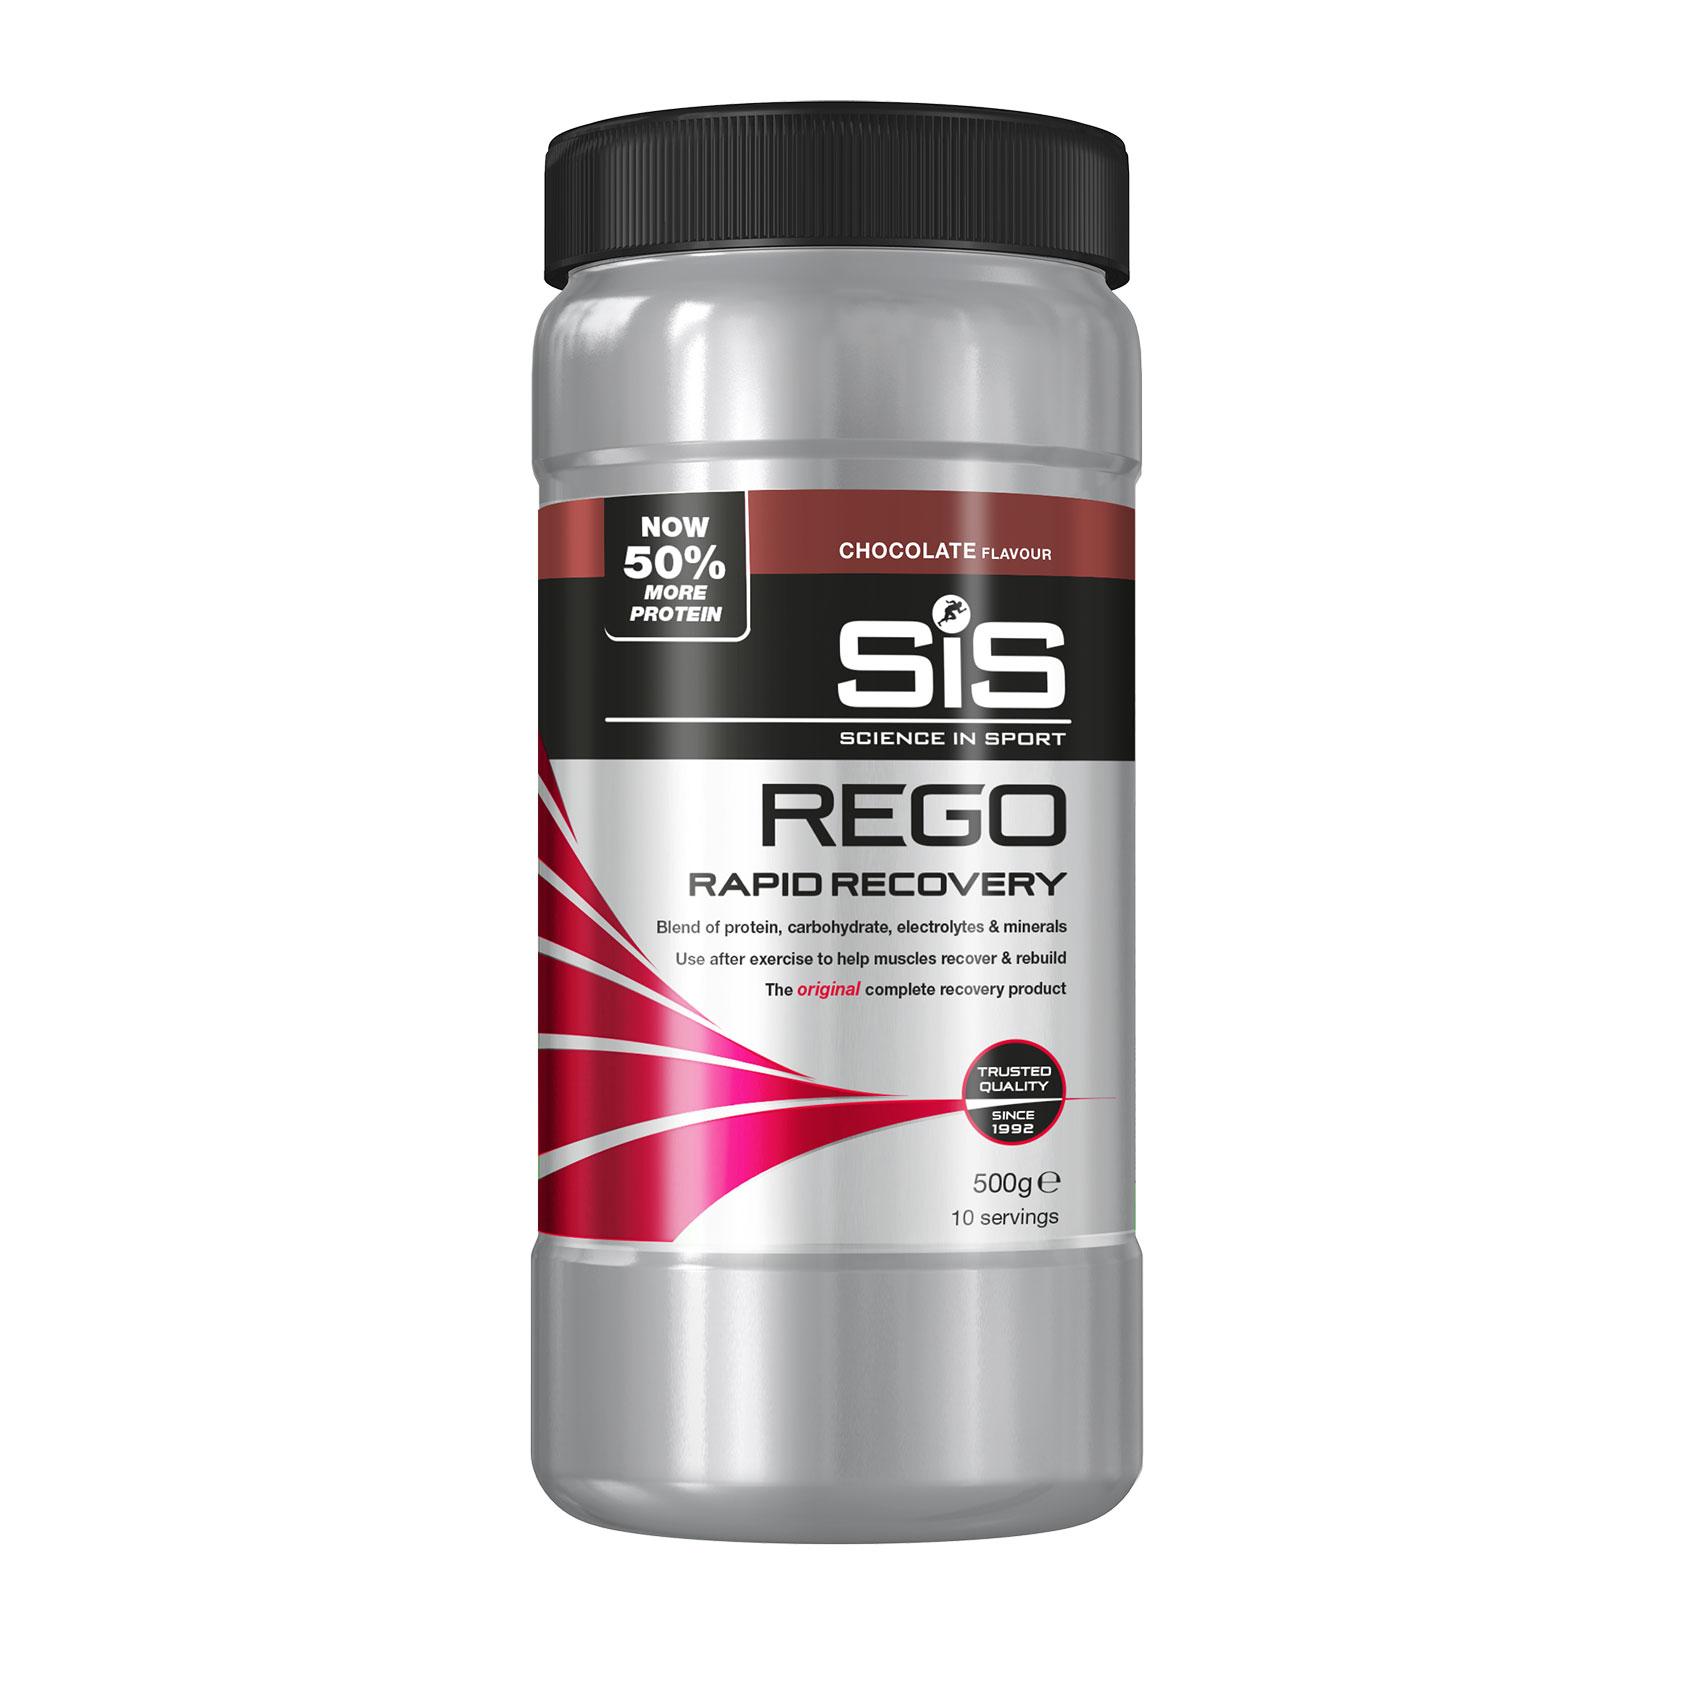 Science In Sport Rego Rapid Recovery (500g)